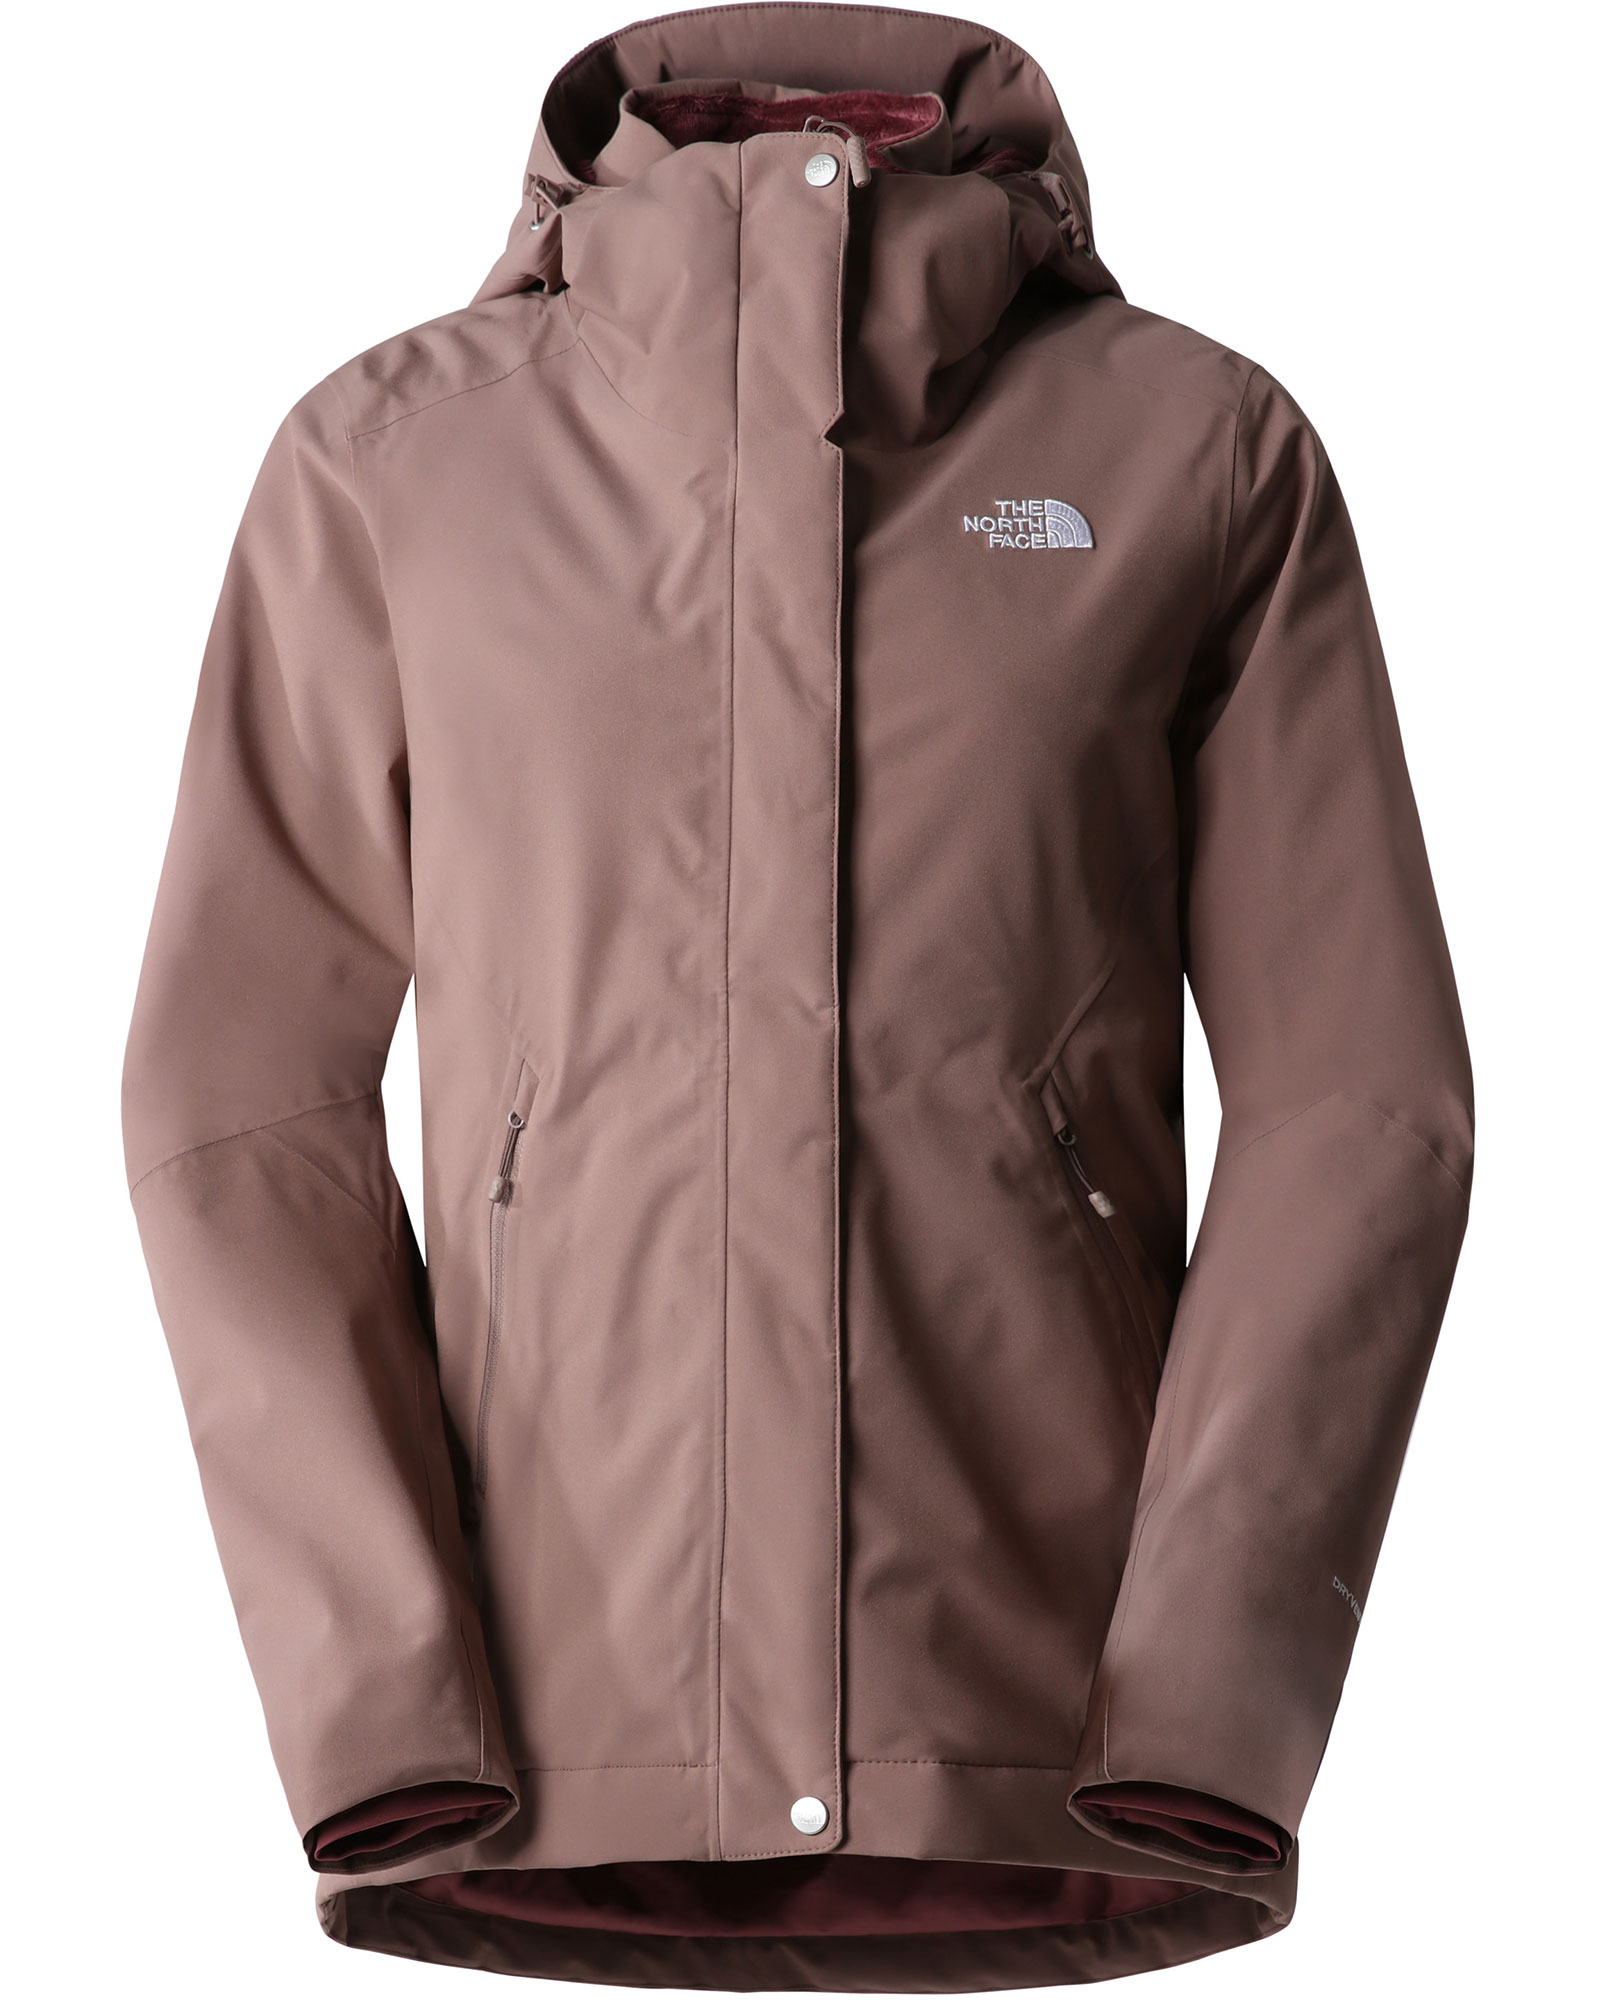 The North Face Inlux Insulated DryVent Women’s Insulated Jacket - Deep Taupe M